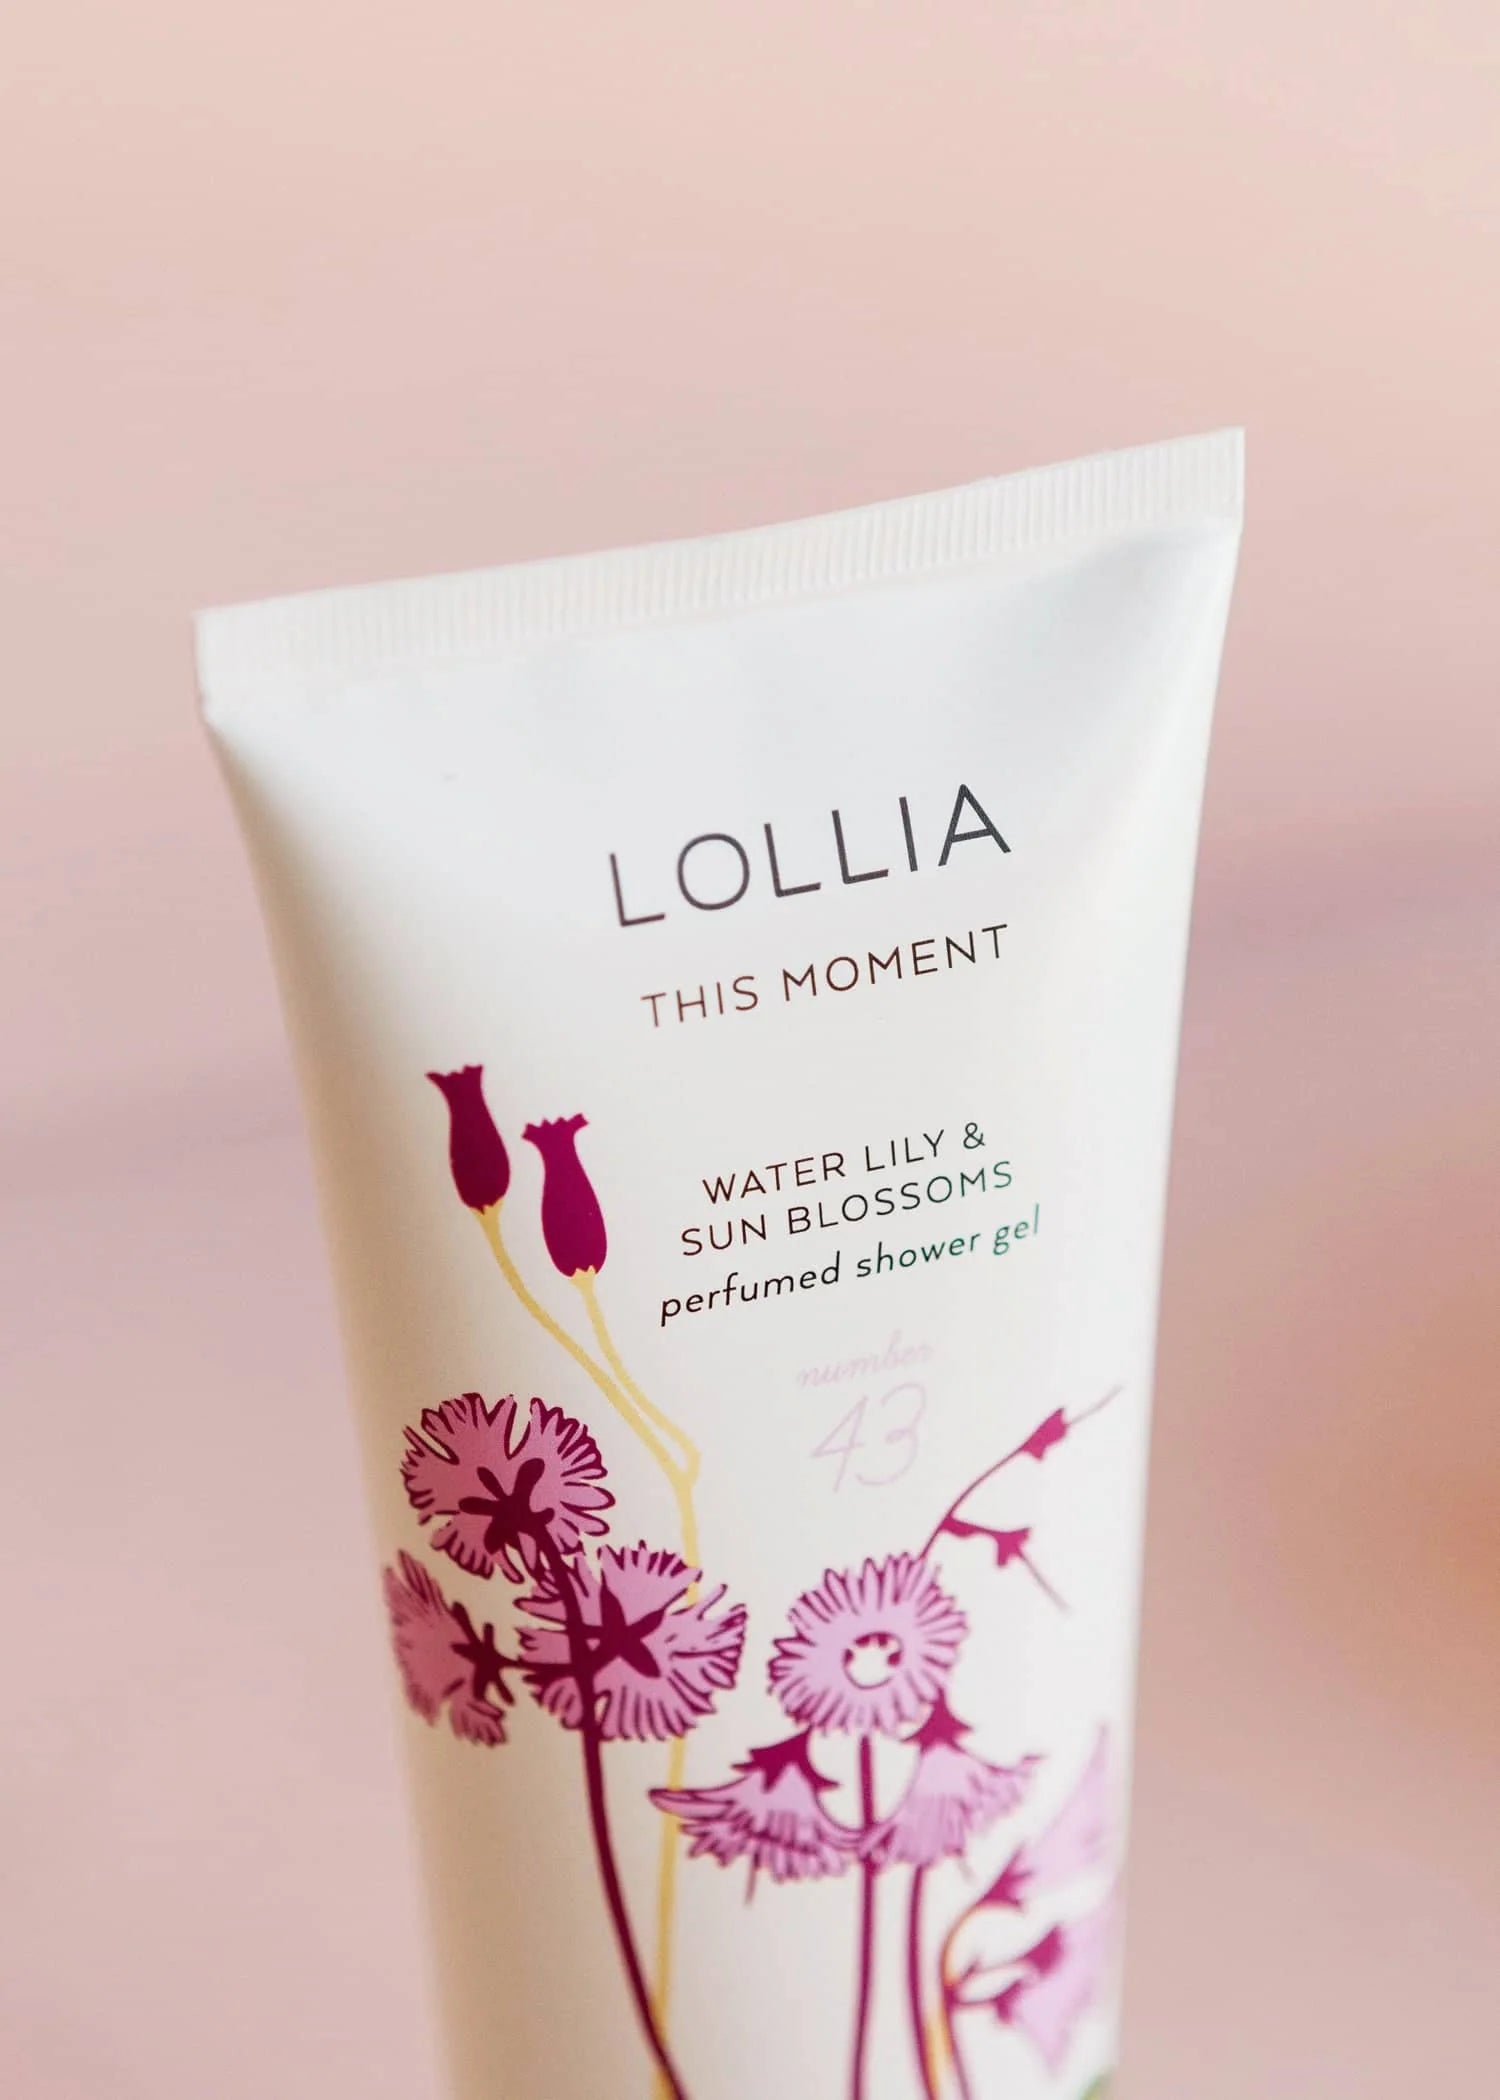 Lollia This Moment Perfumed Shower Gel